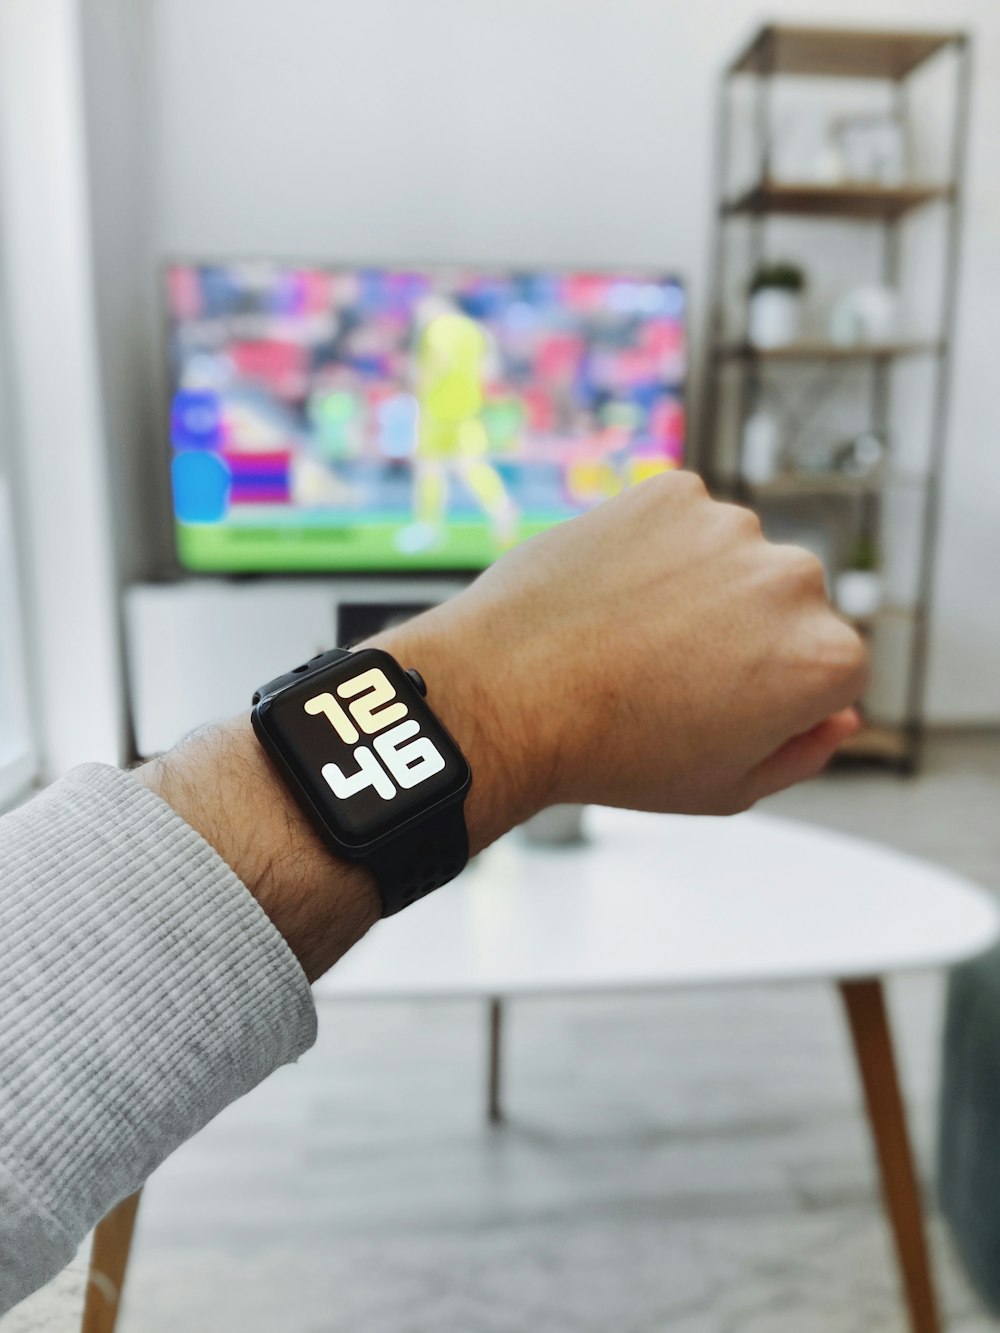 a person wearing a smart watch in front of a television